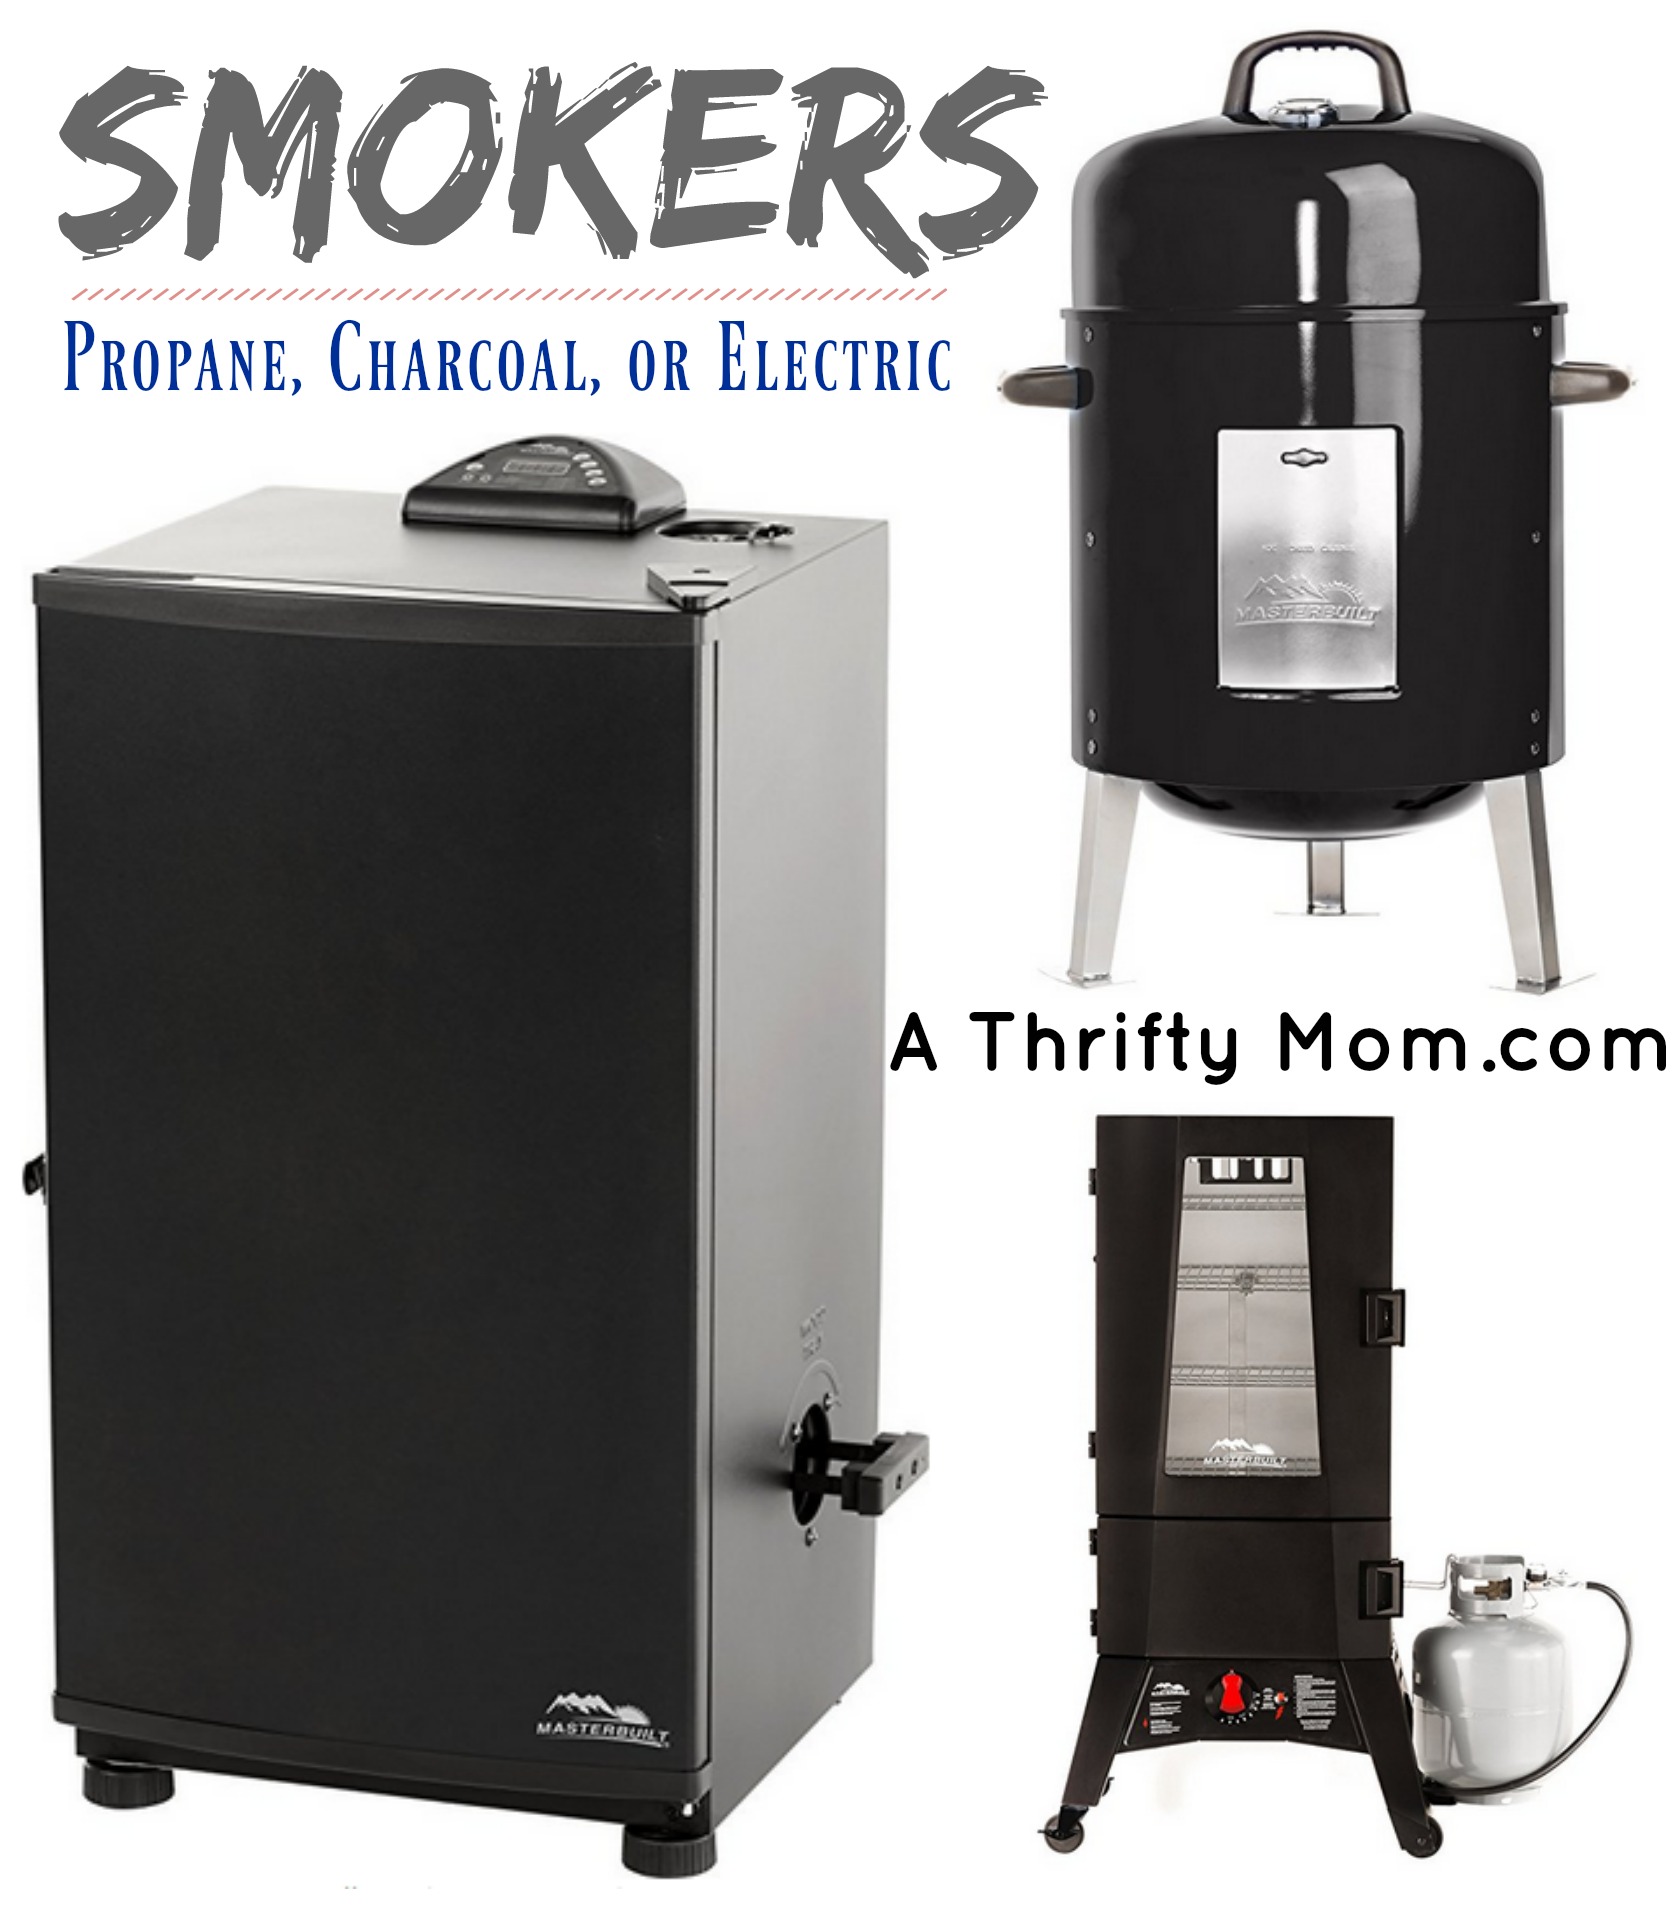 Smokers - Propane, Charcoal, or Electric